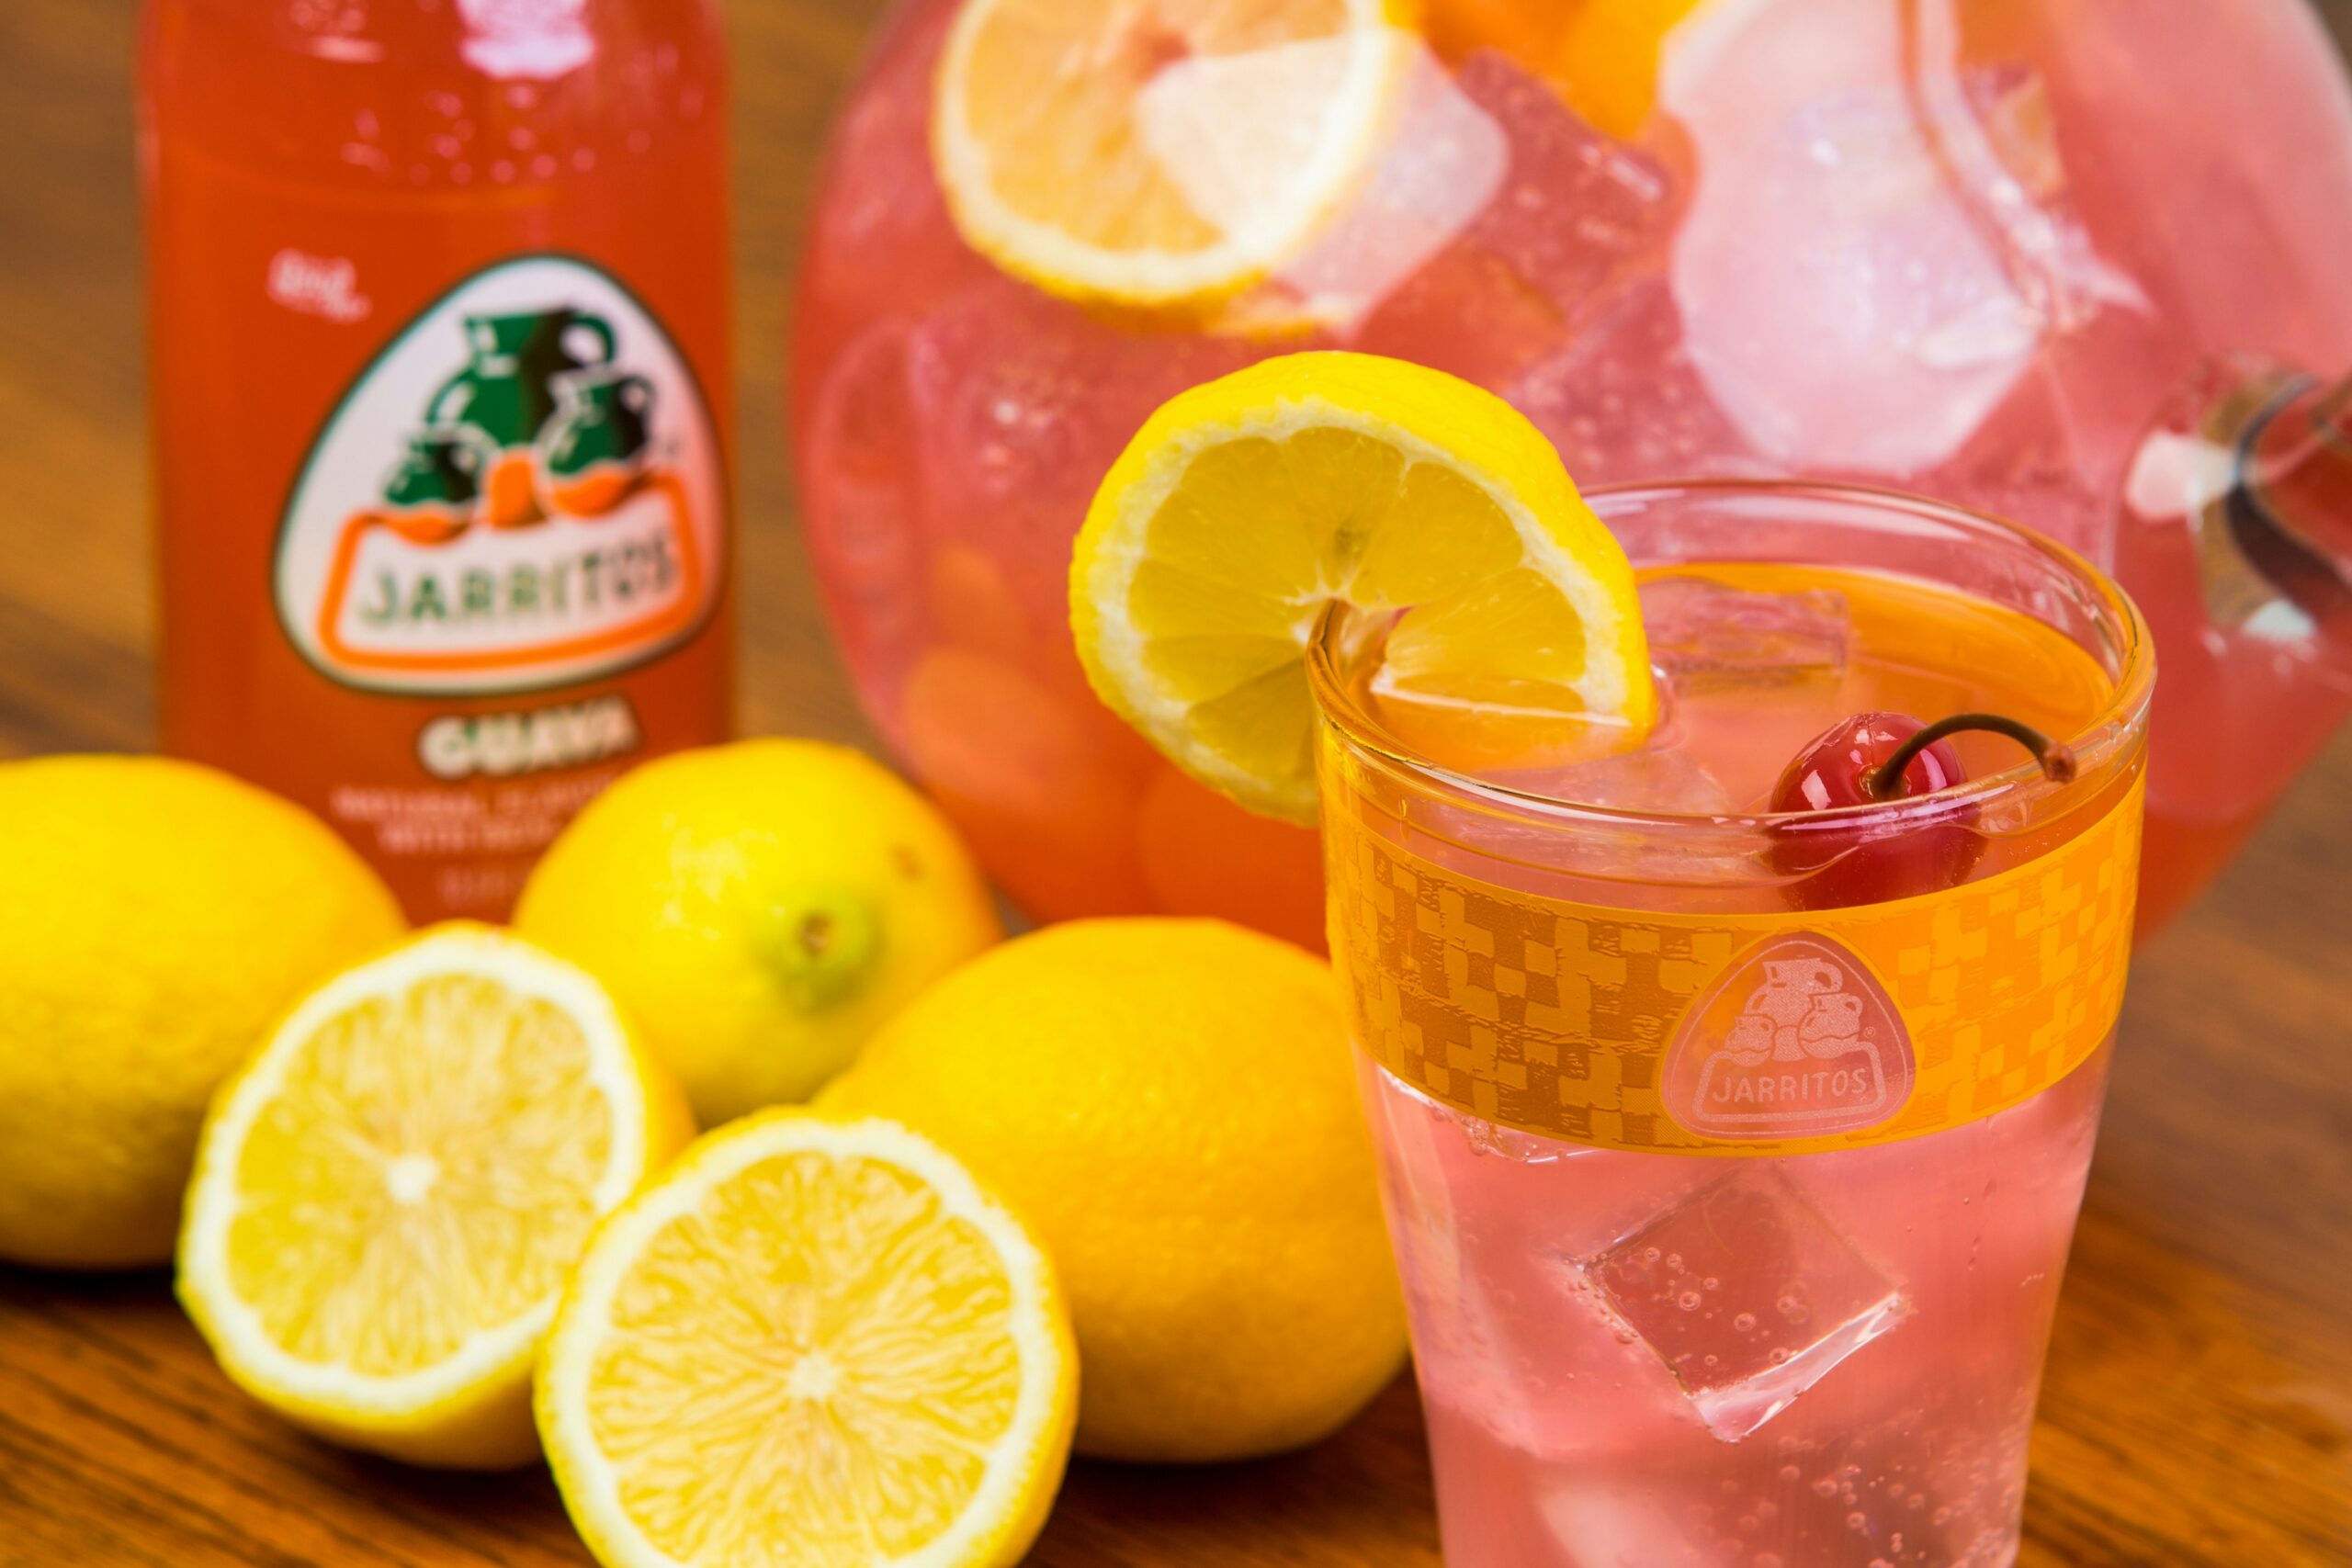 Combine your ingredients to make this Cupid's Kiss love mocktail. Pictured: A pink lemonade drink